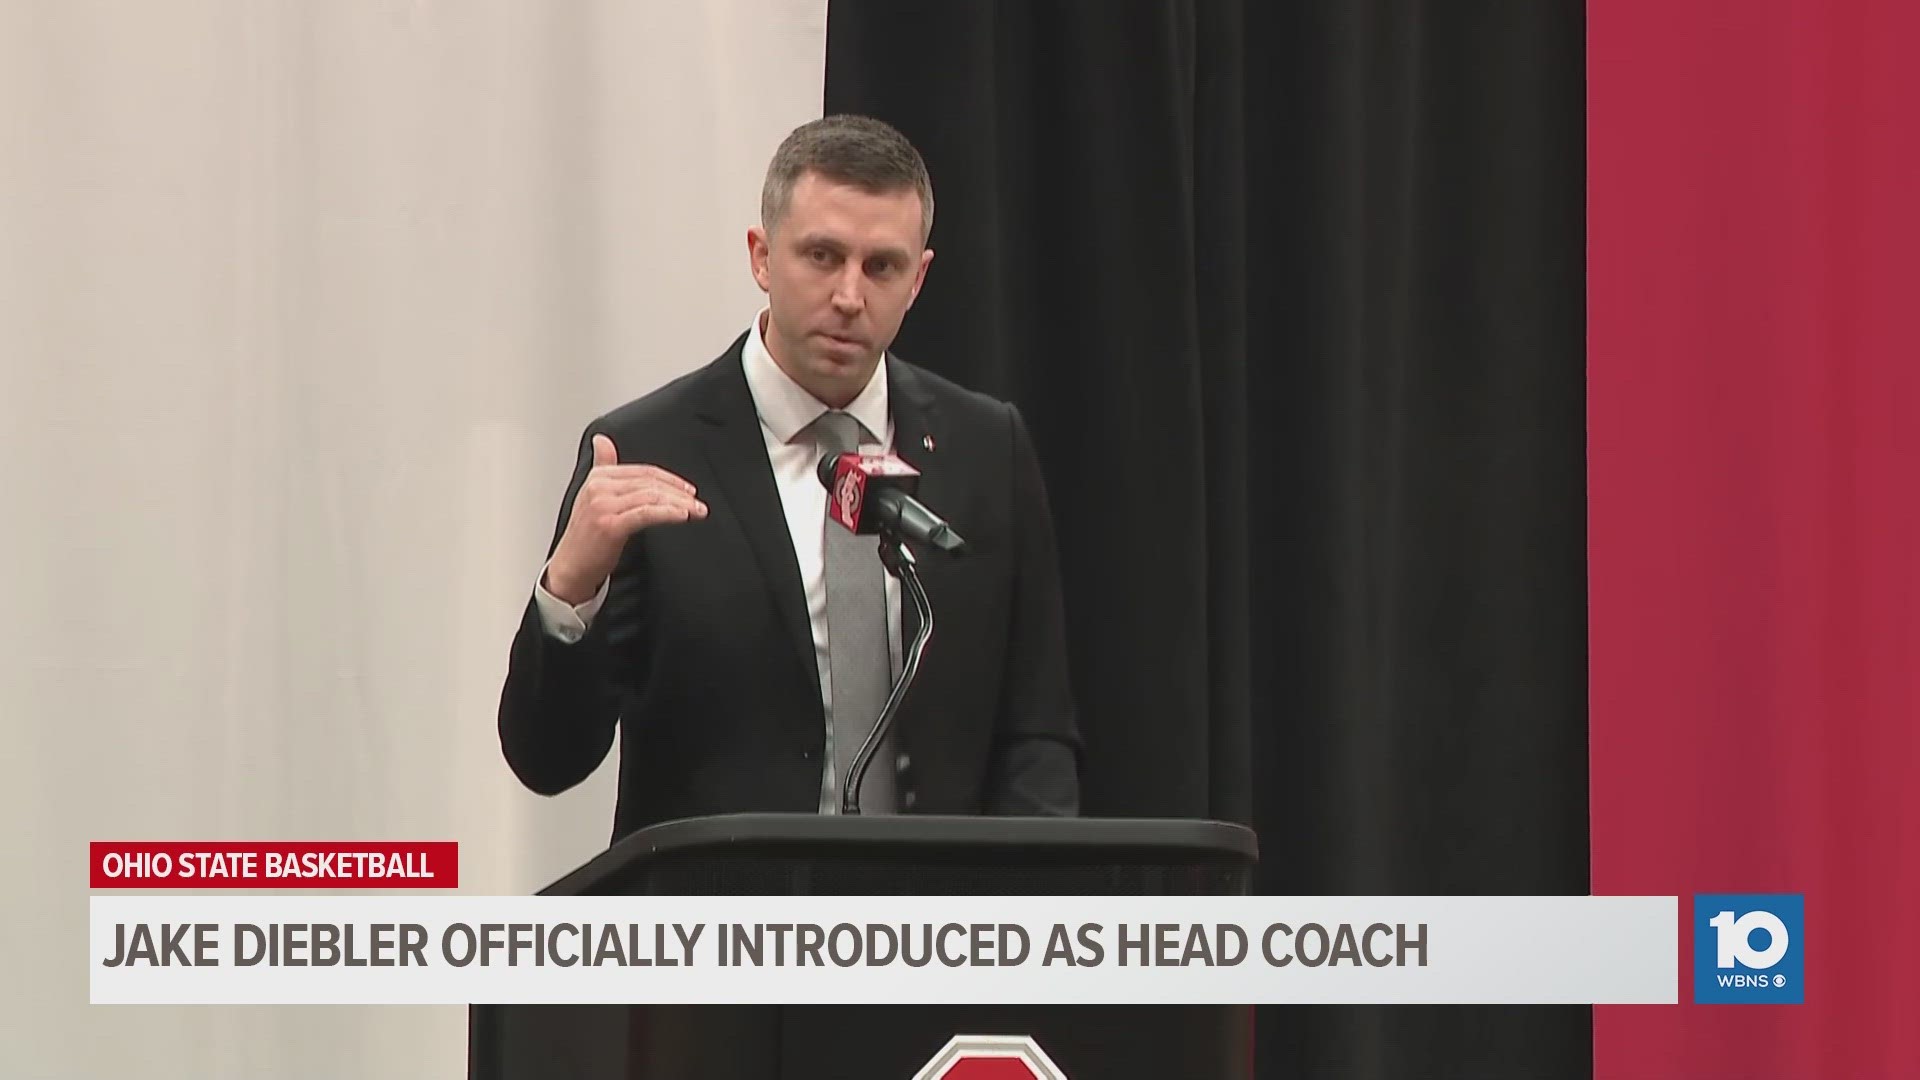 Diebler, the first Ohio native in 35 years to be named men's basketball head coach, is in his eighth season with the Buckeyes.